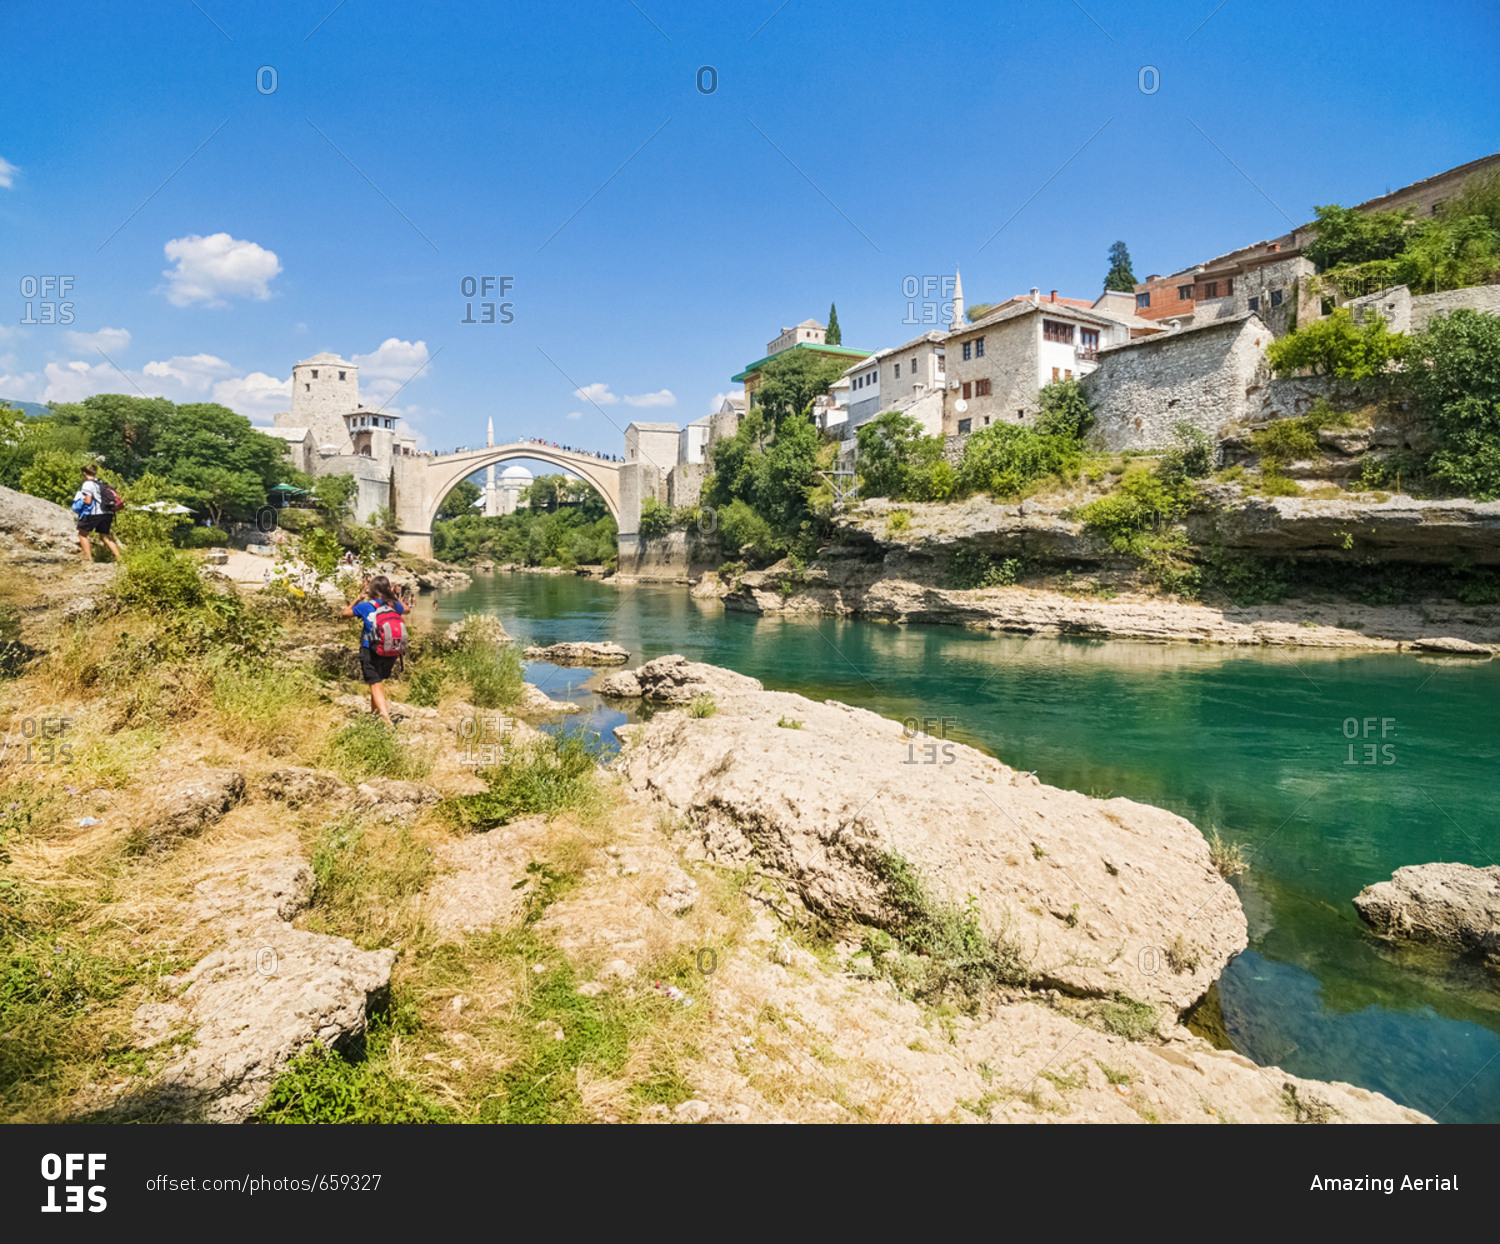 People on shore of Neretva river with Old Bridge in background, Mostar, Bosnia and Herzegovina.